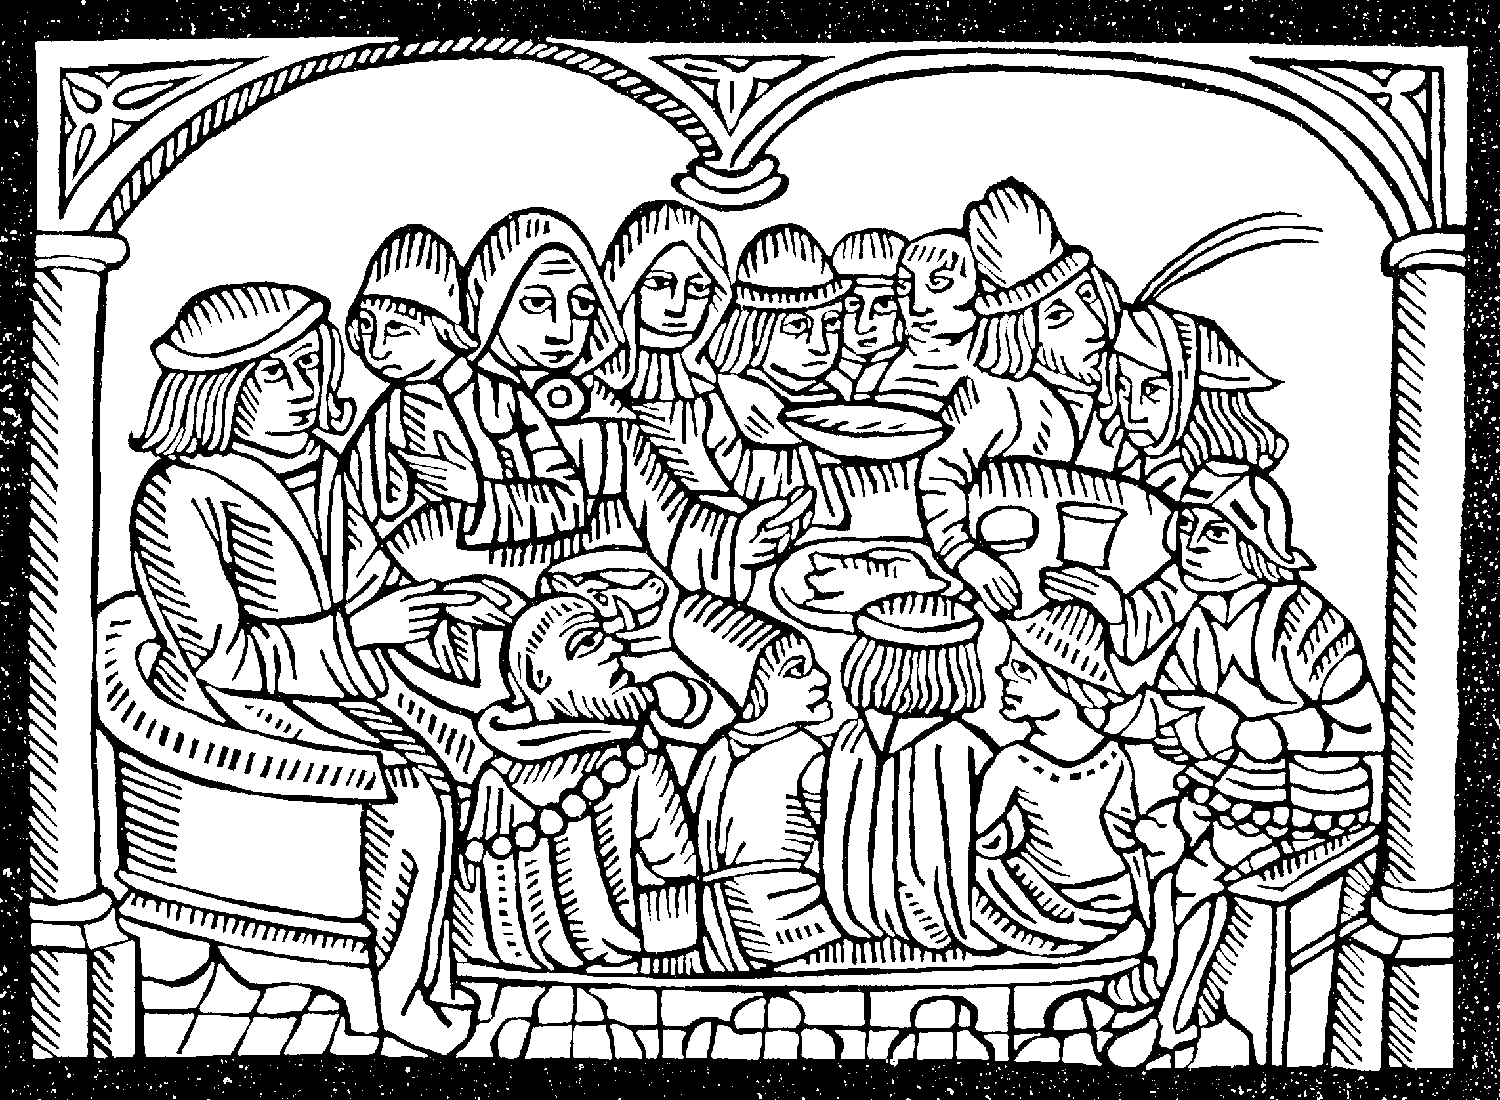 medieval banquets in the middle ages